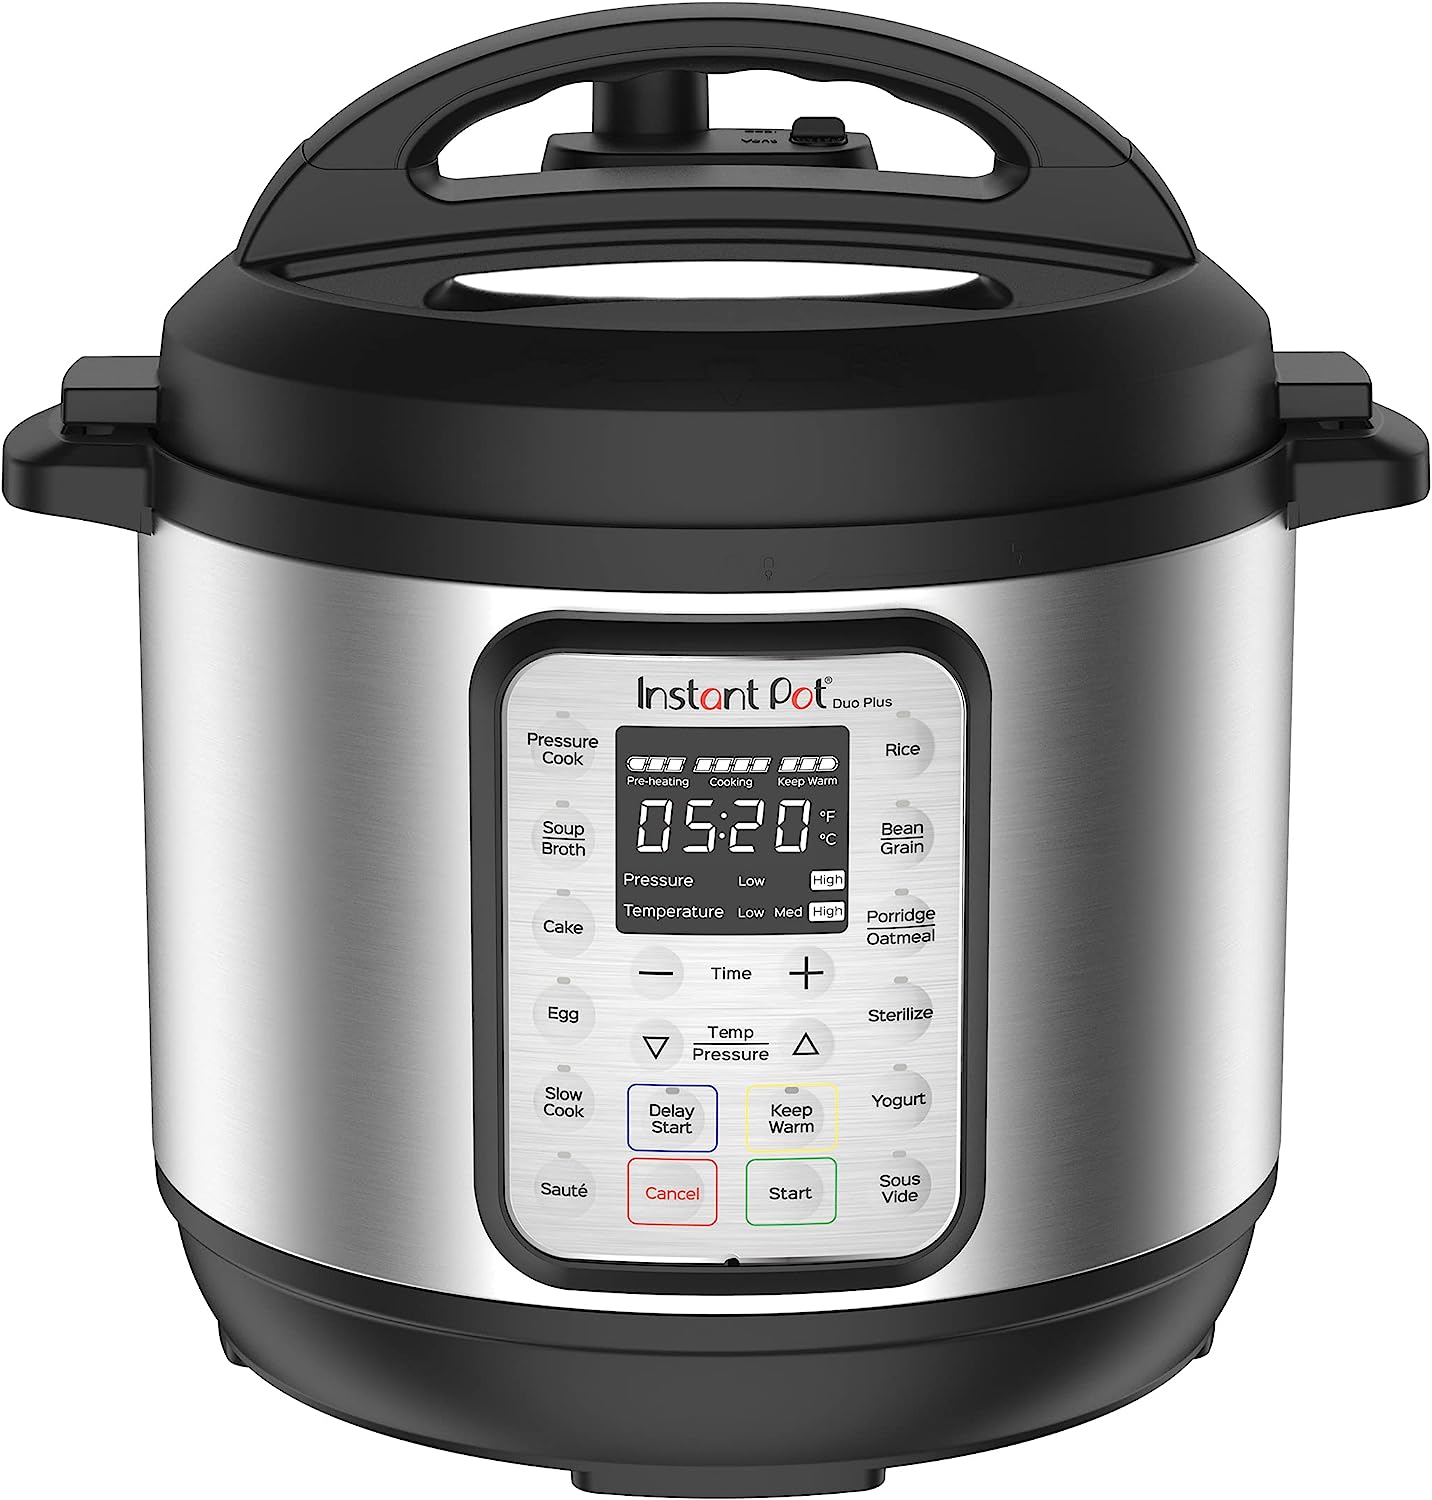 https://bigbigmart.com/wp-content/uploads/2023/06/Instant-Pot-Duo-Plus-9-in-1-Electric-Pressure-Cooker-Slow-Cooker-Rice-Cooker-Steamer-Saute-Yogurt-Maker-Warmer-Sterilizer-Includes-Free-App-with-over-1900-Recipes-Stainless-Steel-3-Quart.jpg